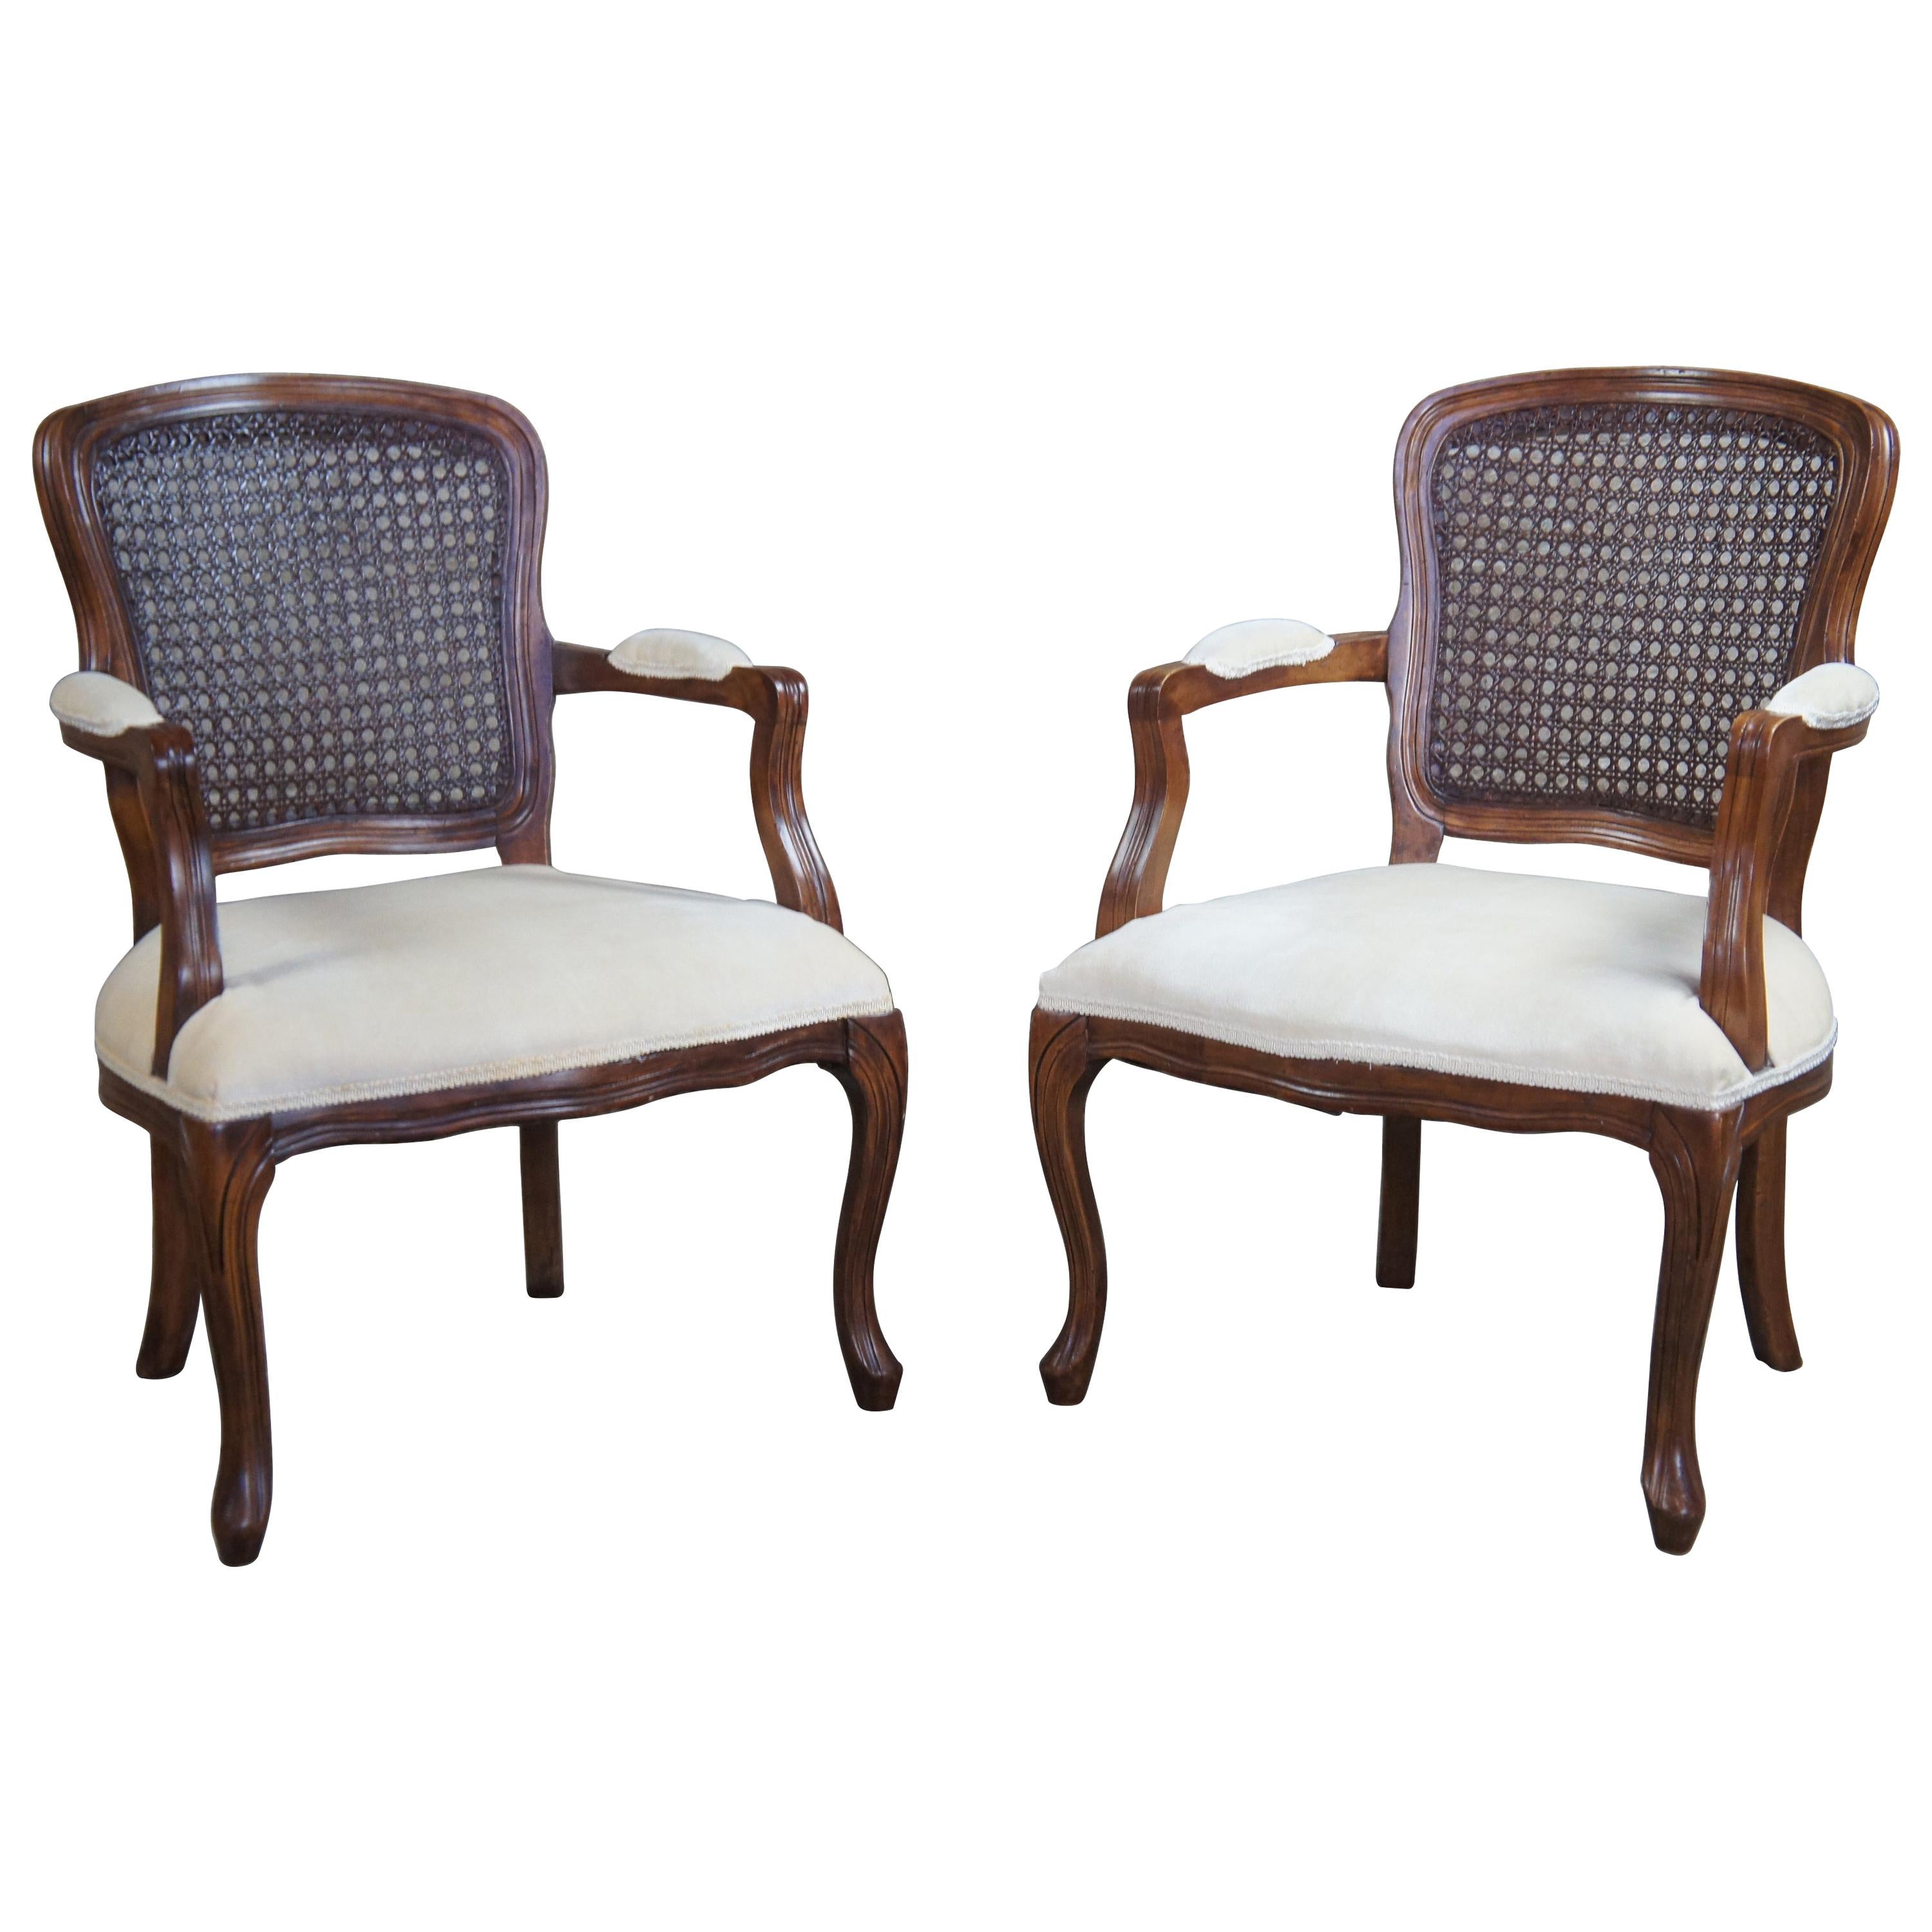 2 Antique French Provincial Walnut Cane Back Parlor Armchairs Fauteuil, Pair